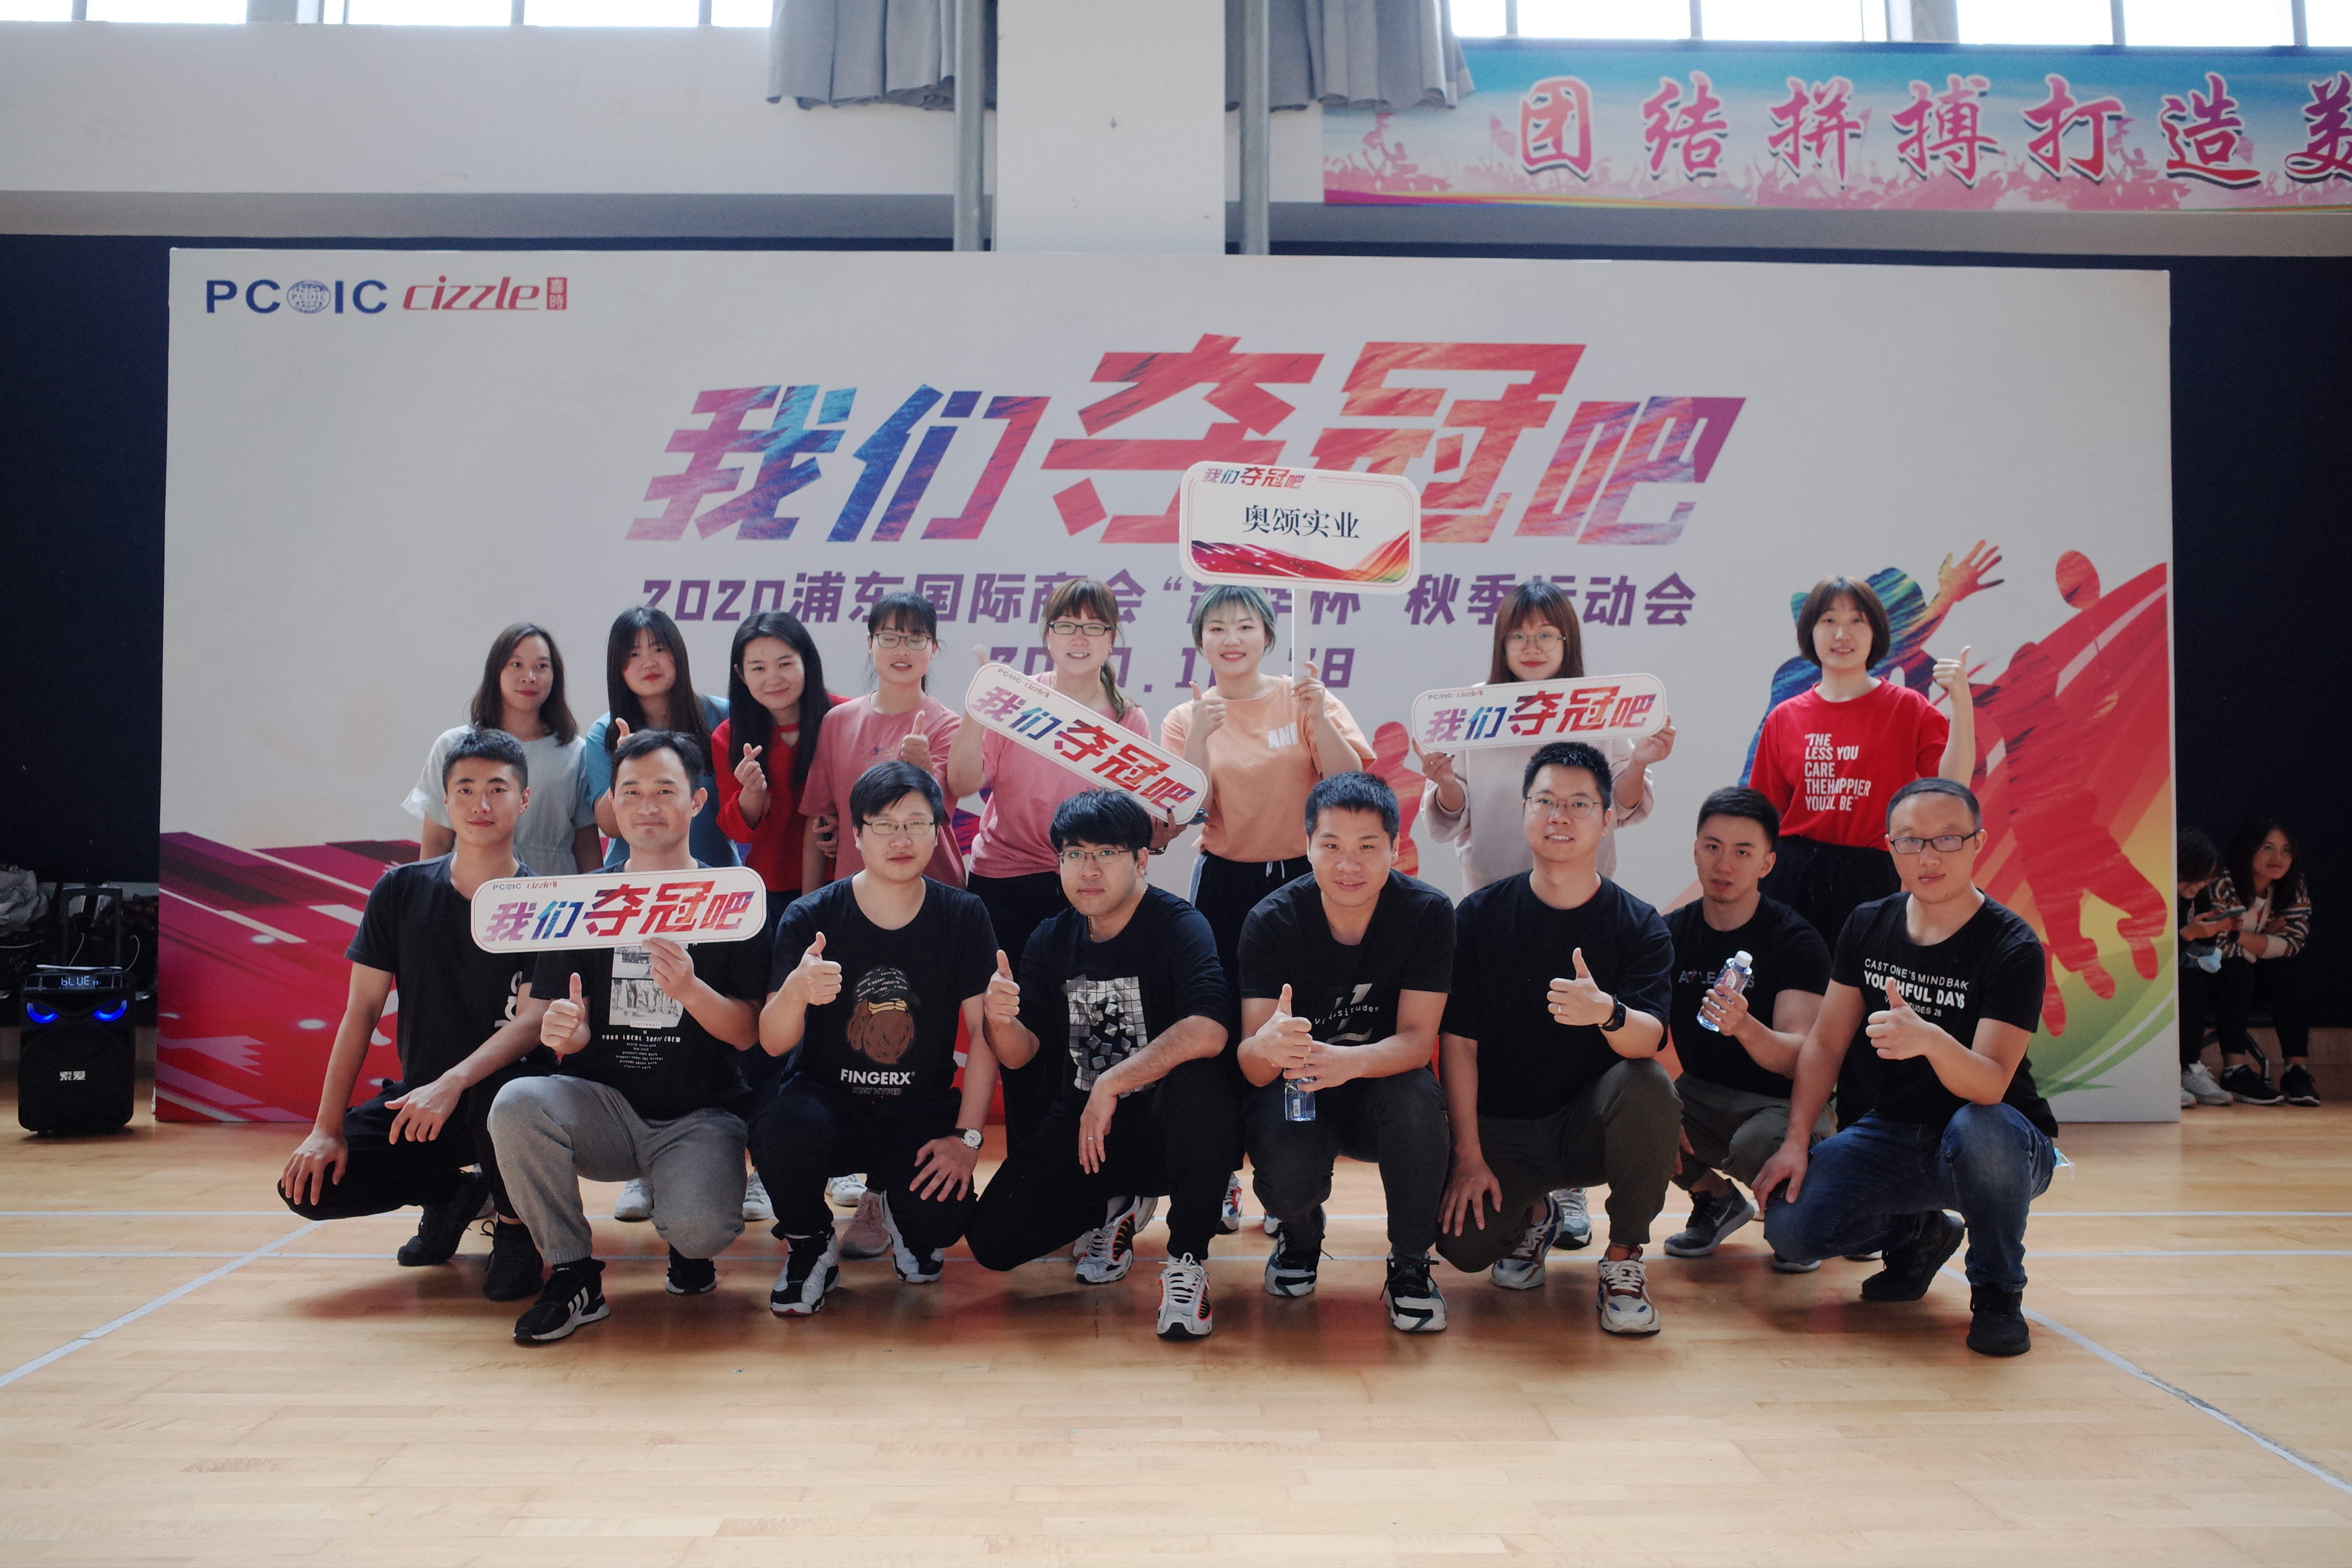 On October 28, 2020, our company participated in the autumn sports meeting.